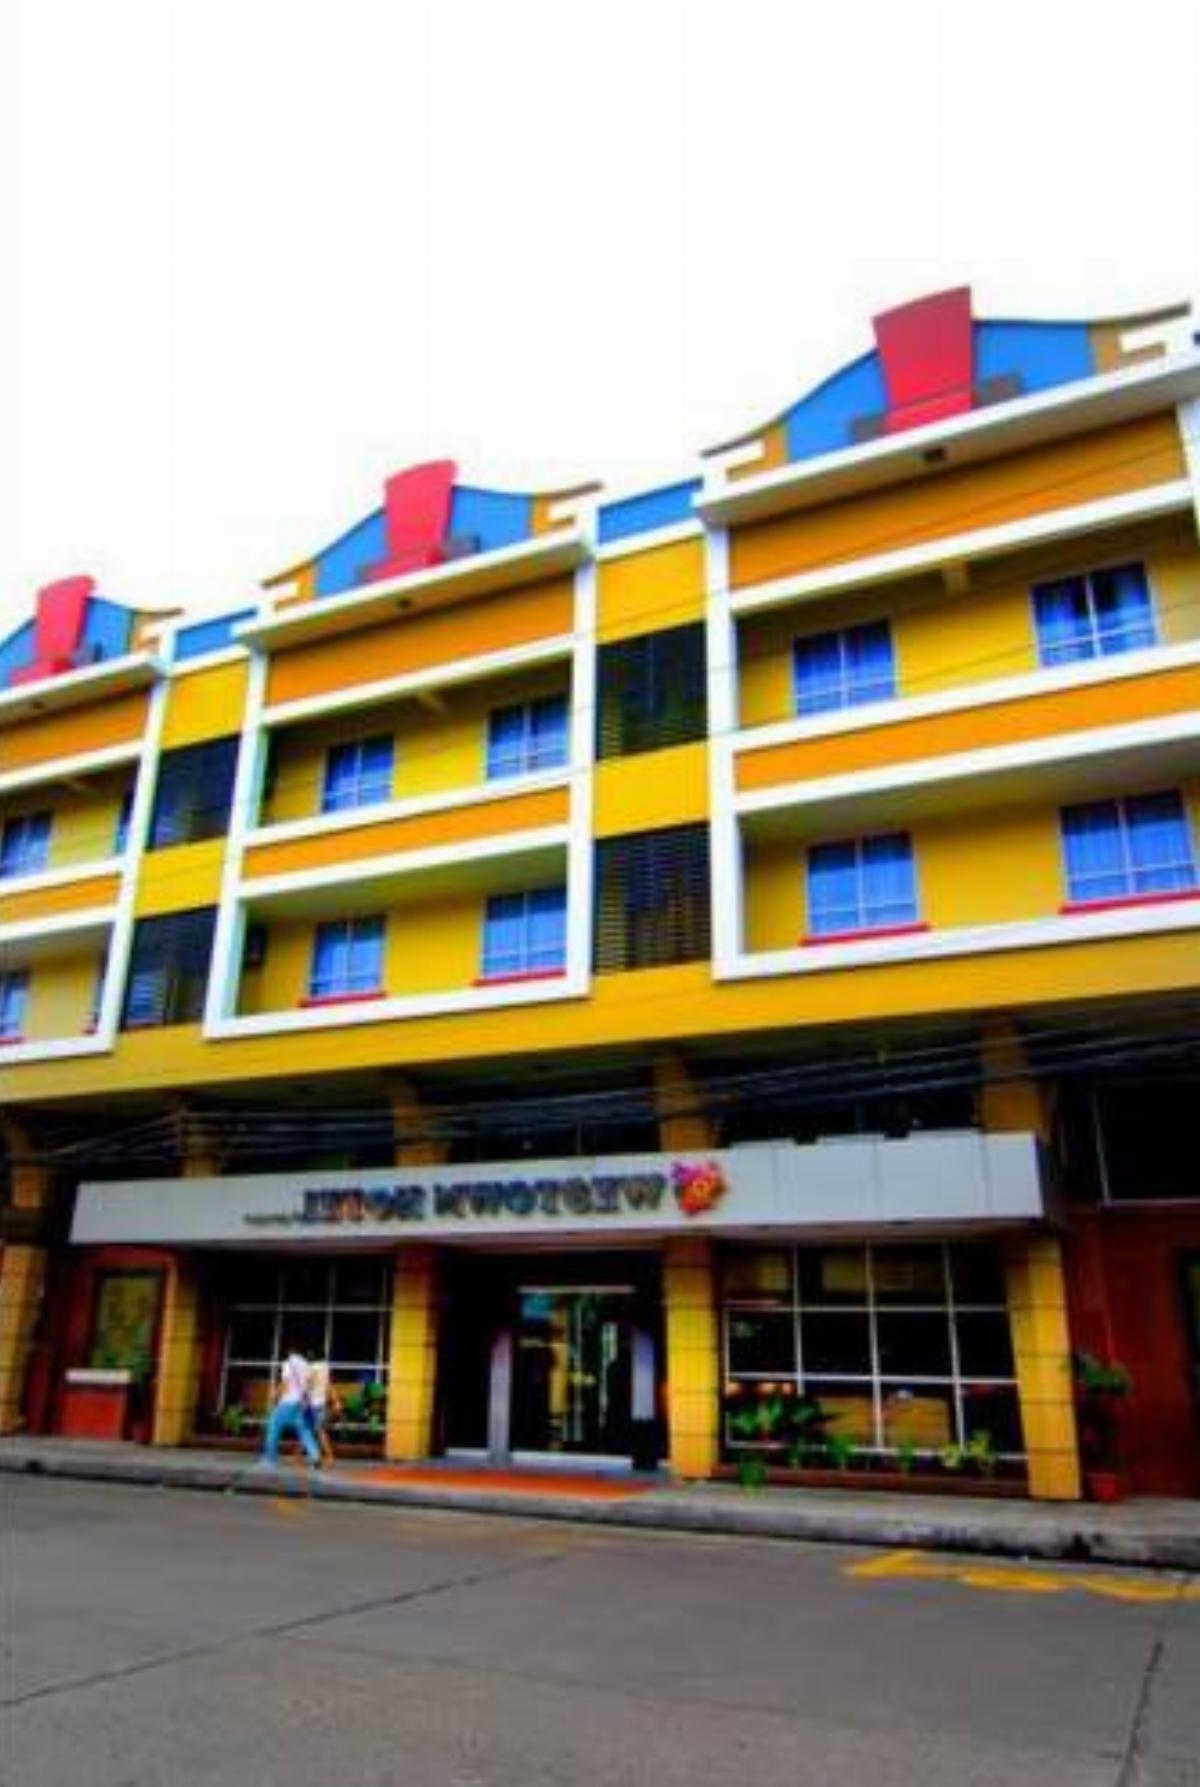 MO2 Westown Hotel - San Juan Hotel Bacolod Philippines